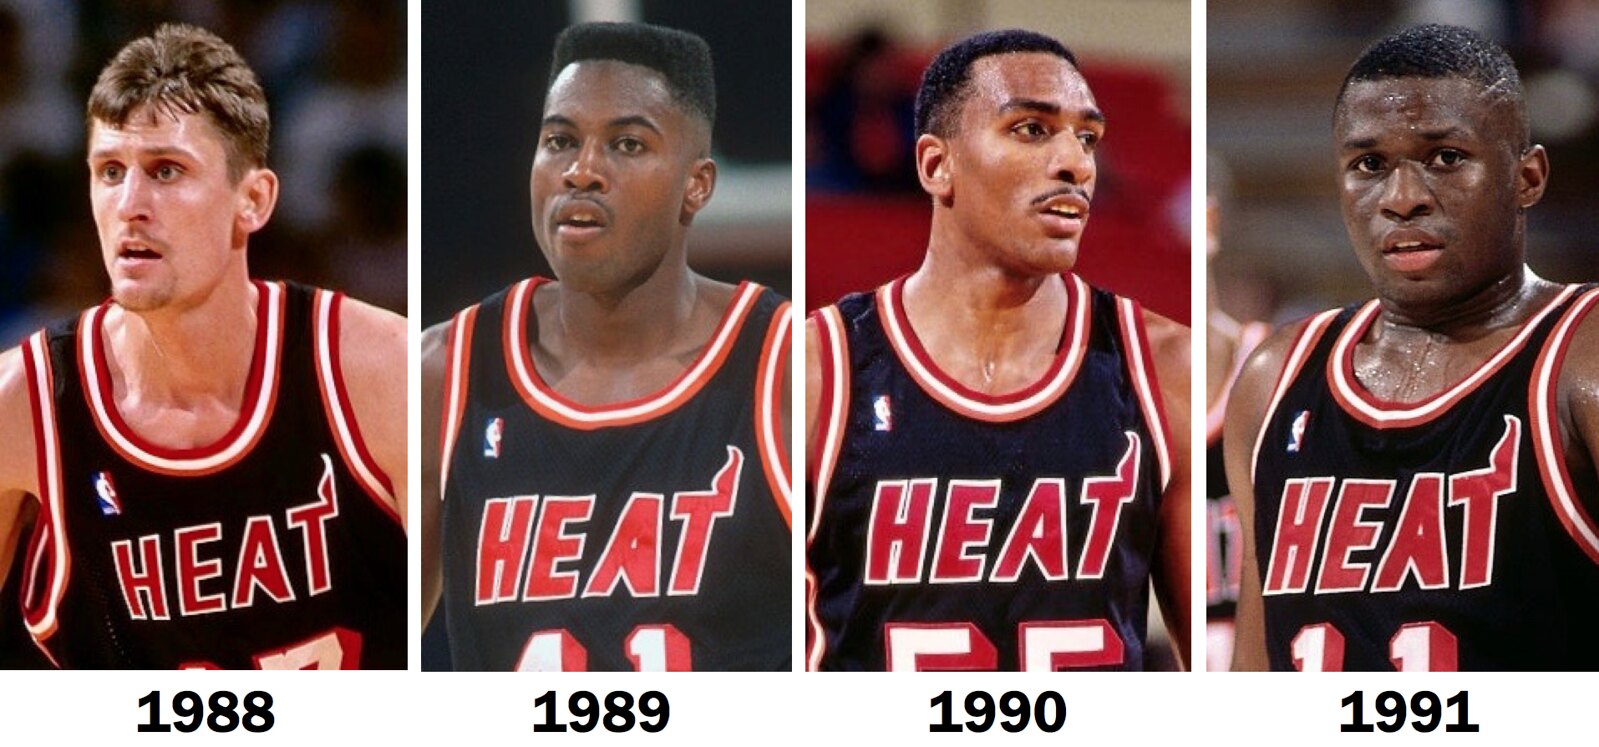 Miami Heat bringing back throwback jerseys from NBA debut in 1988